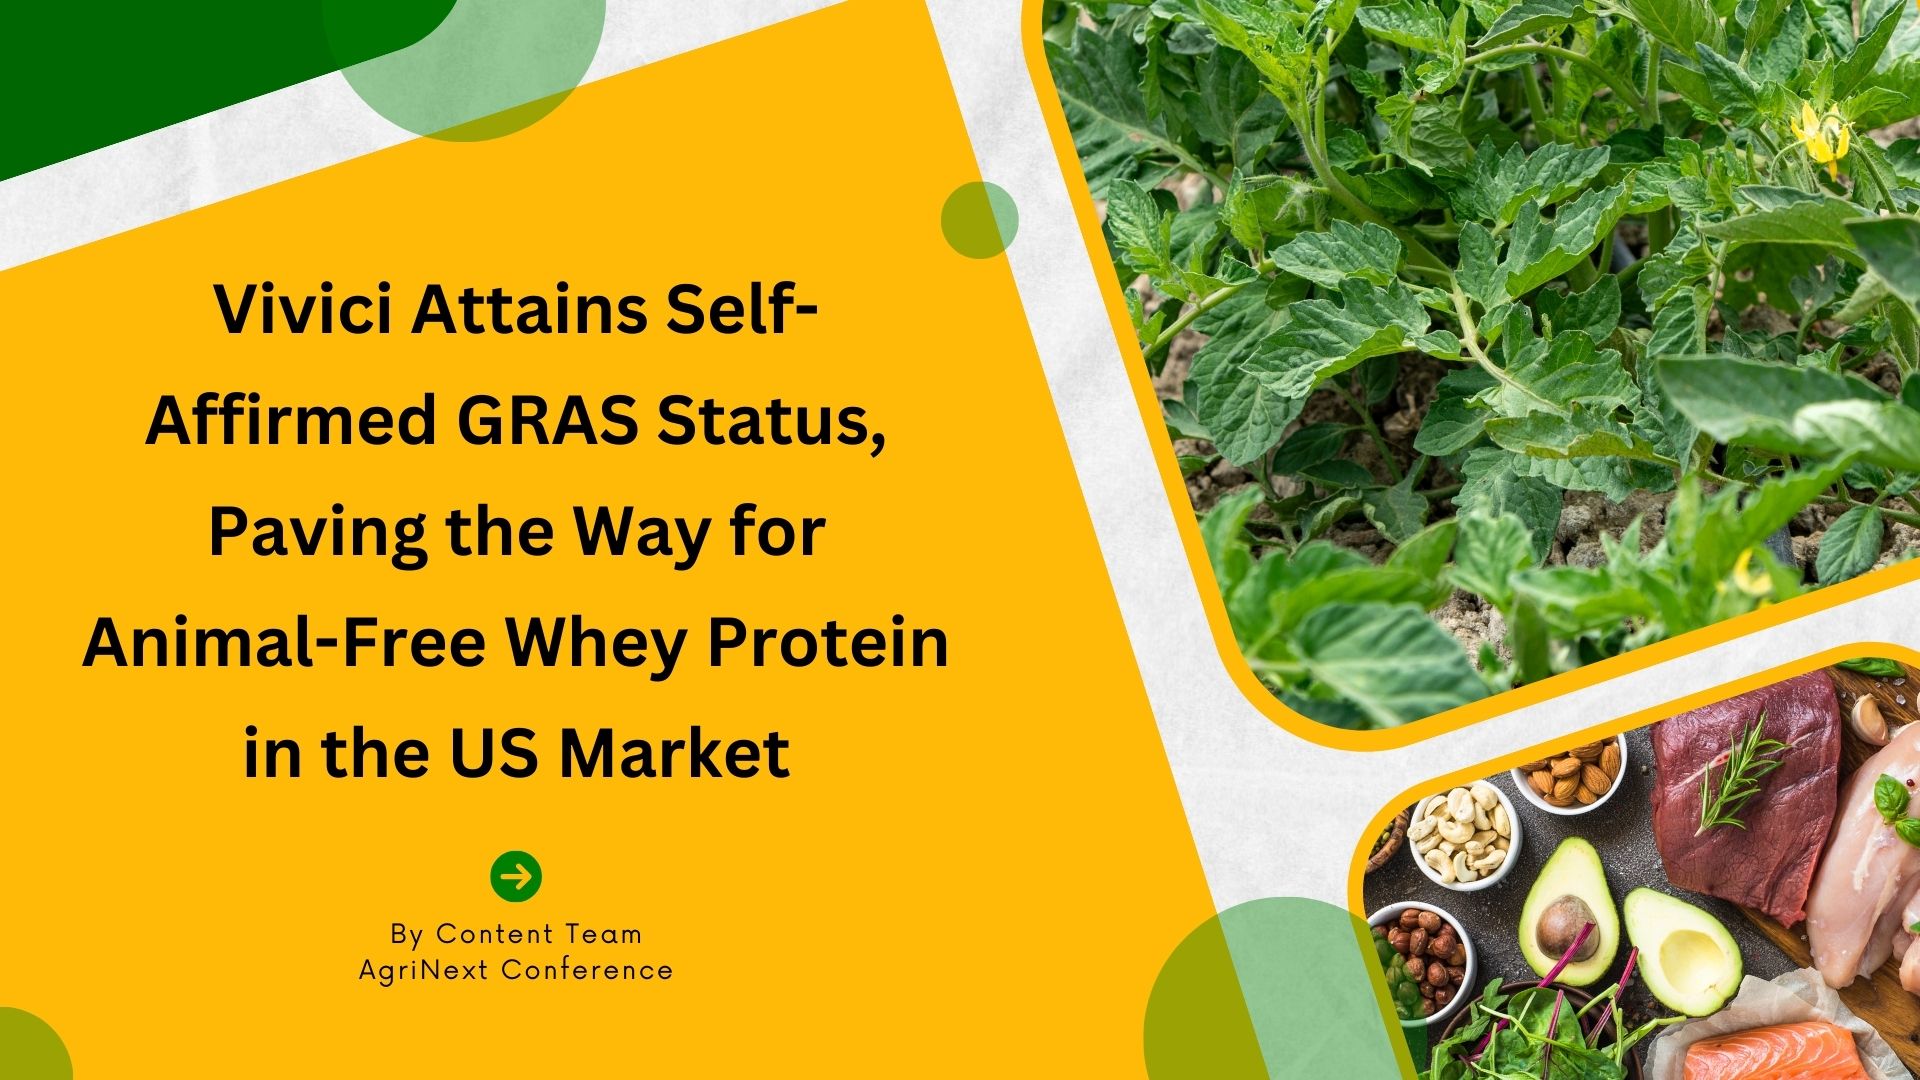 Vivici Attains Self-Affirmed GRAS Status, Paving the Way for Animal-Free Whey Protein in the US Market.